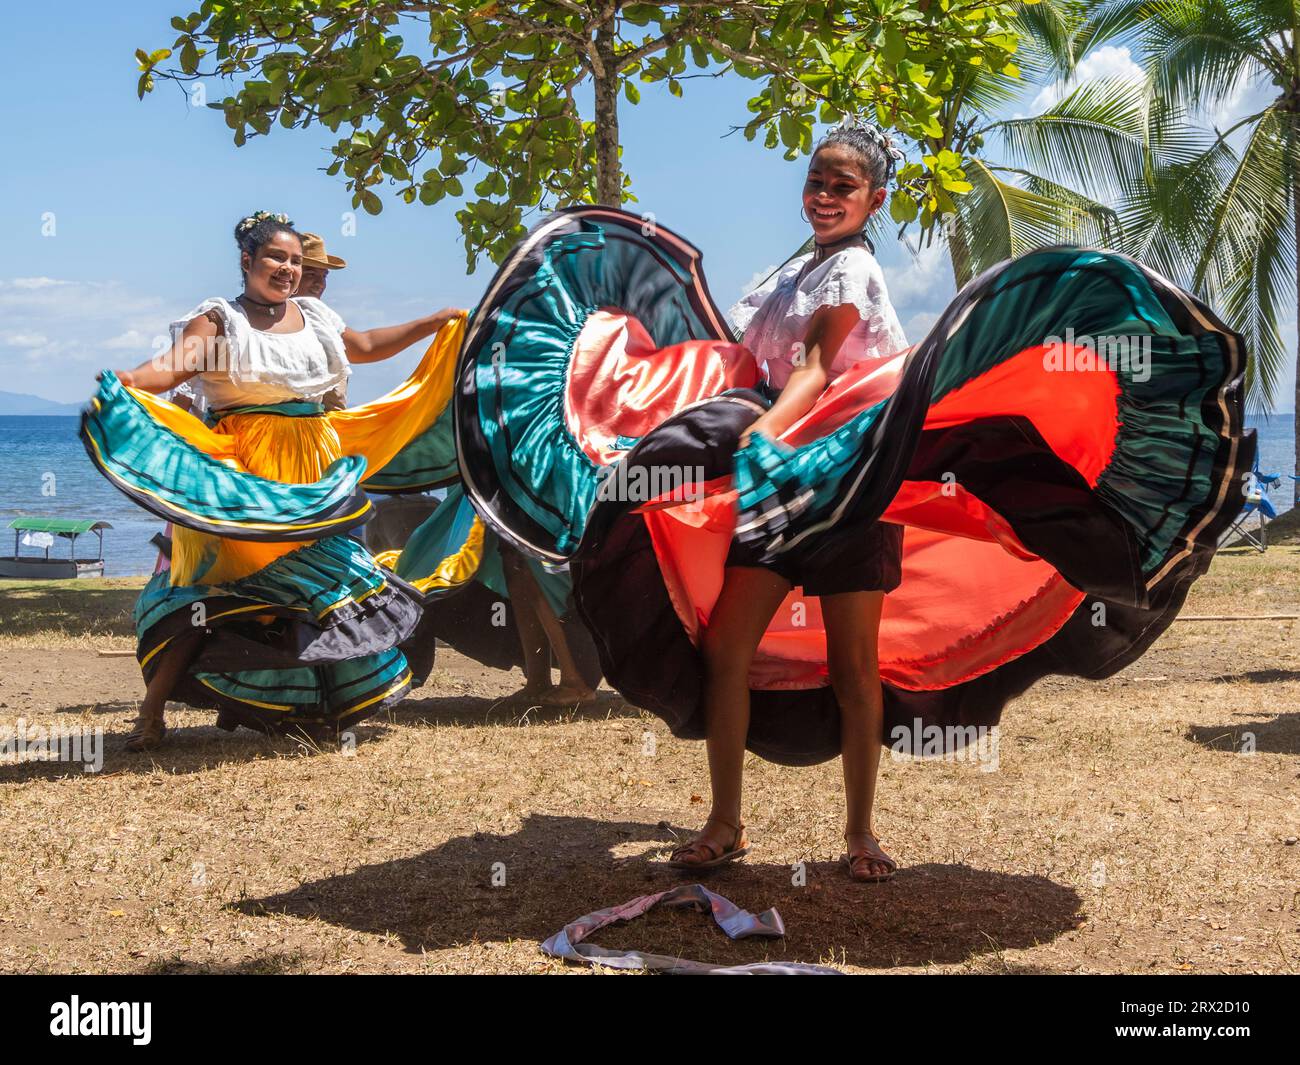 A group of young Costa Rican dancers in traditional dress perform at Playa Blanca, El Golfito, Costa Rica, Central America Stock Photo